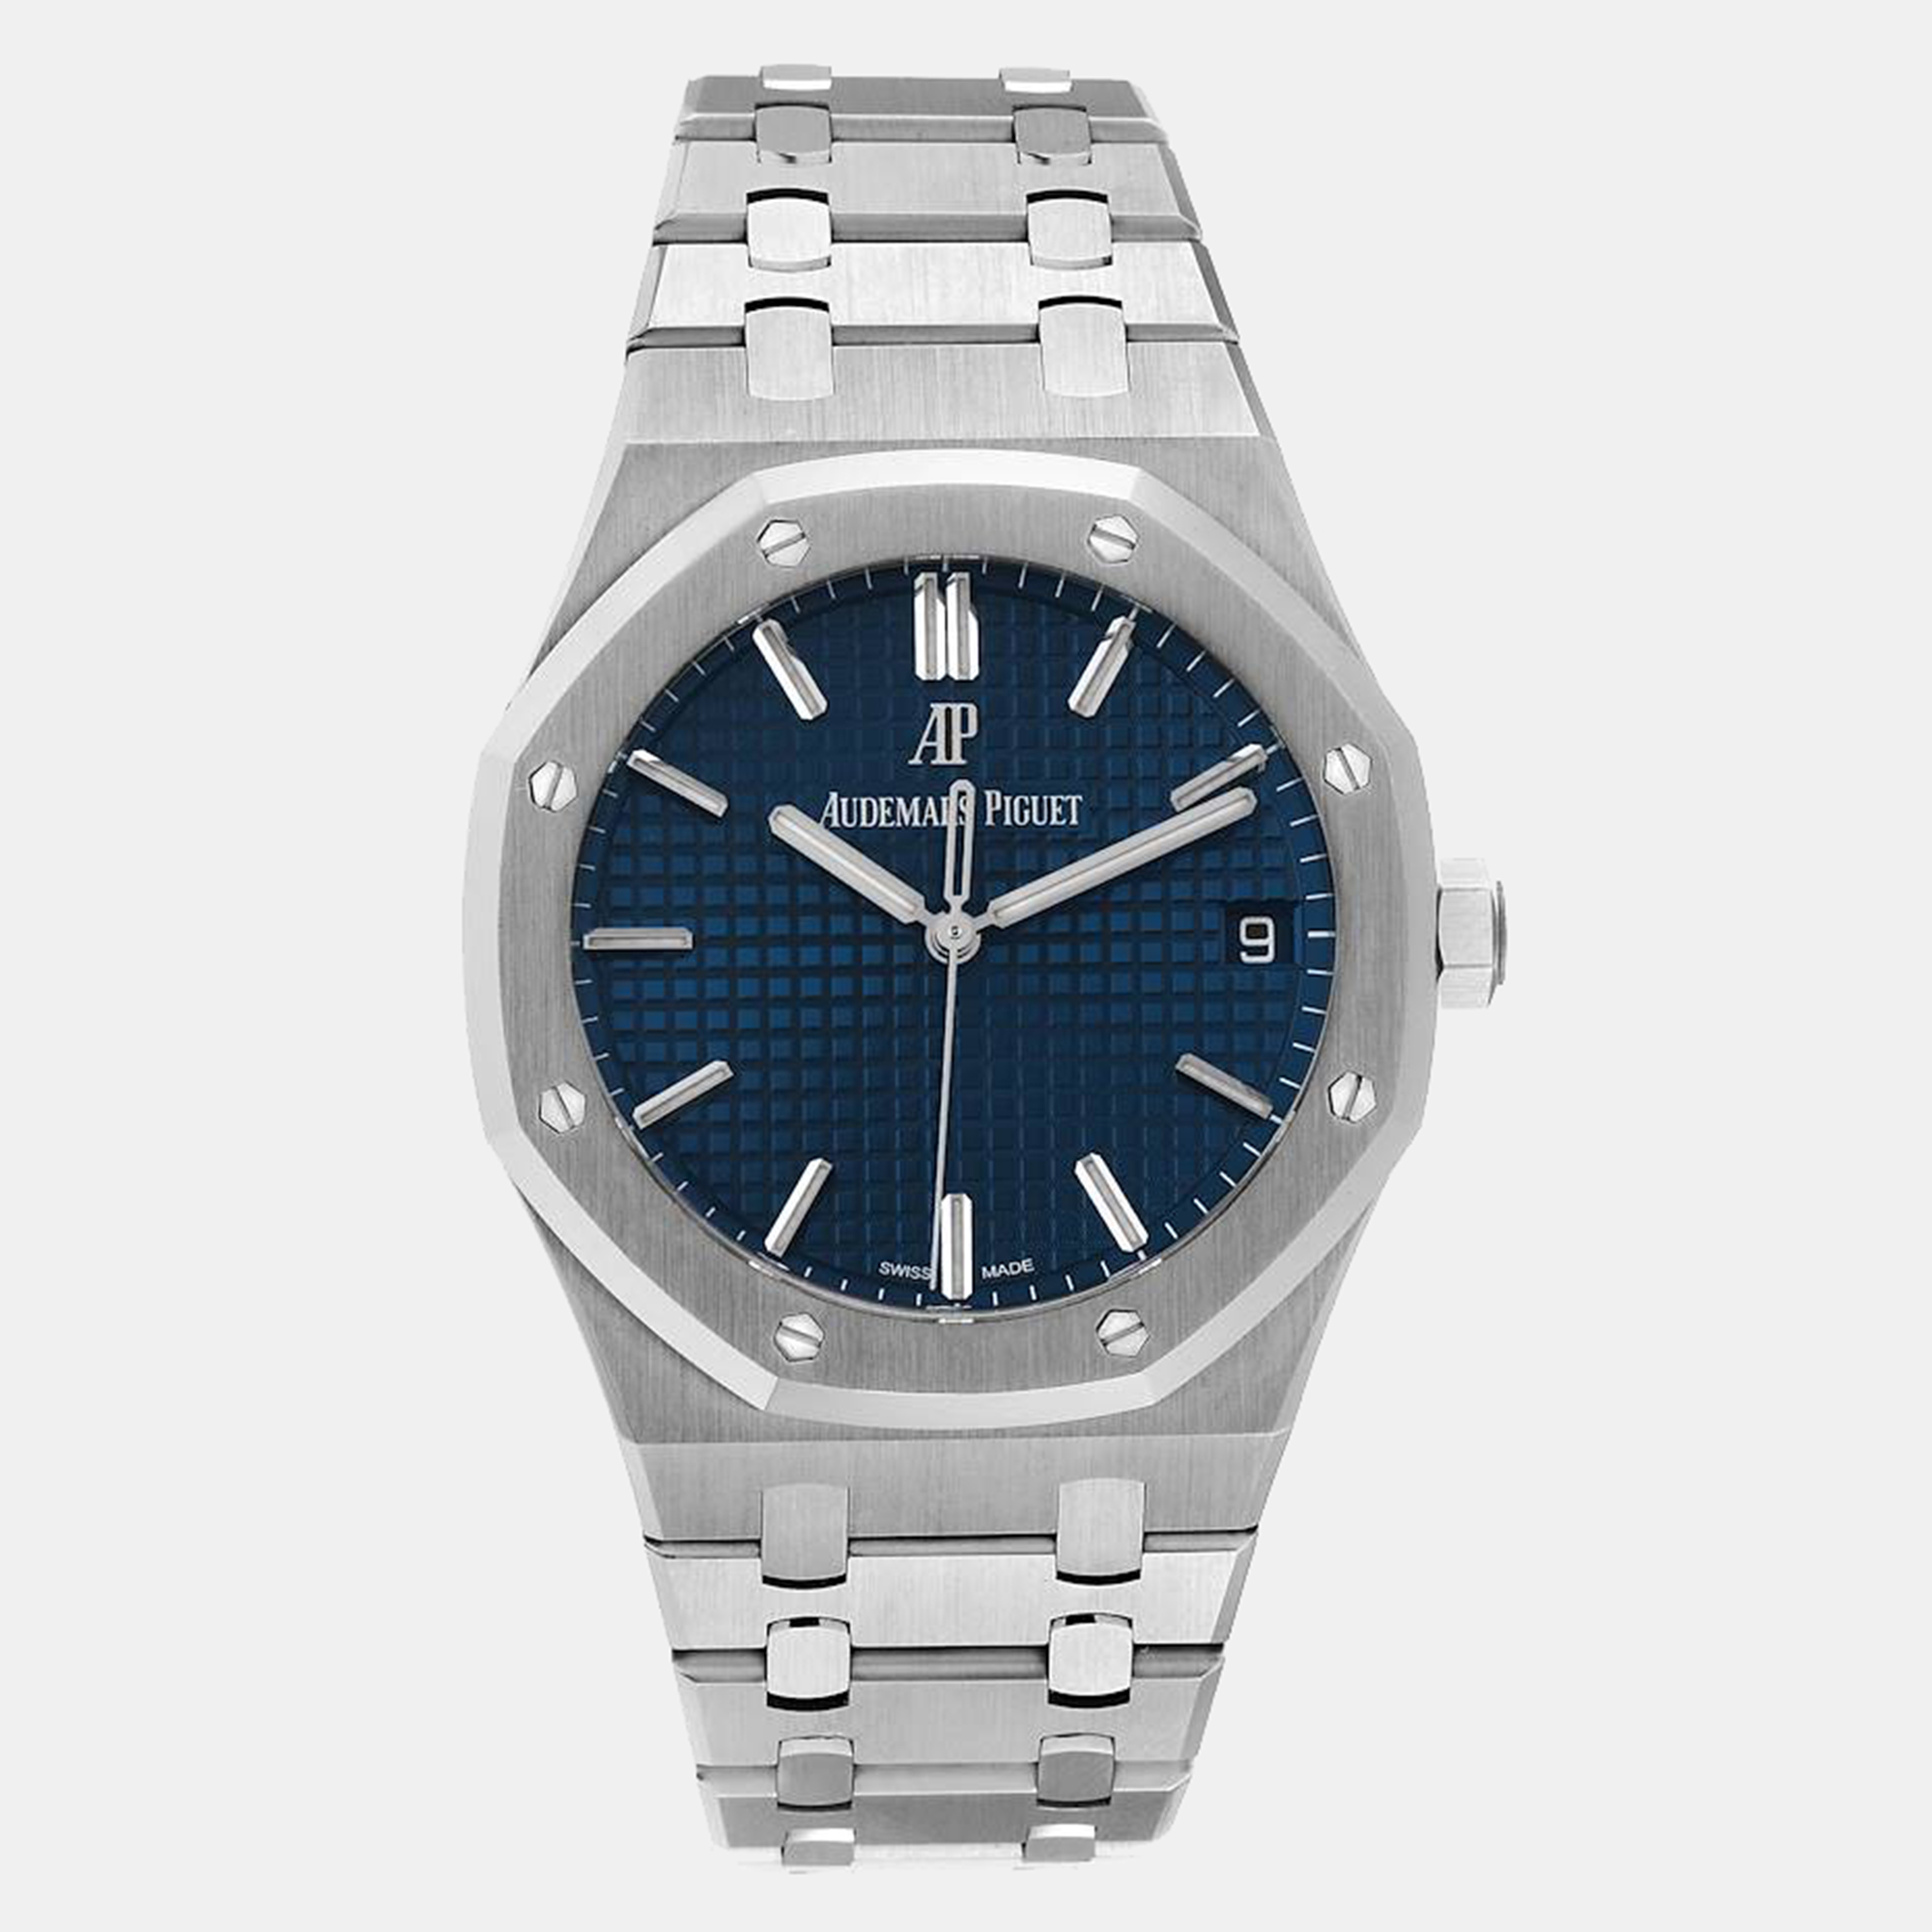 Created in 1972 the Audemars Piguet Royal Oak is a watch that has inspired generations of watchmakers and luxury watch collectors. Recognizable at first glance the Royal Oak is a creation like no other. It is a timepiece one would treasure for years to come.